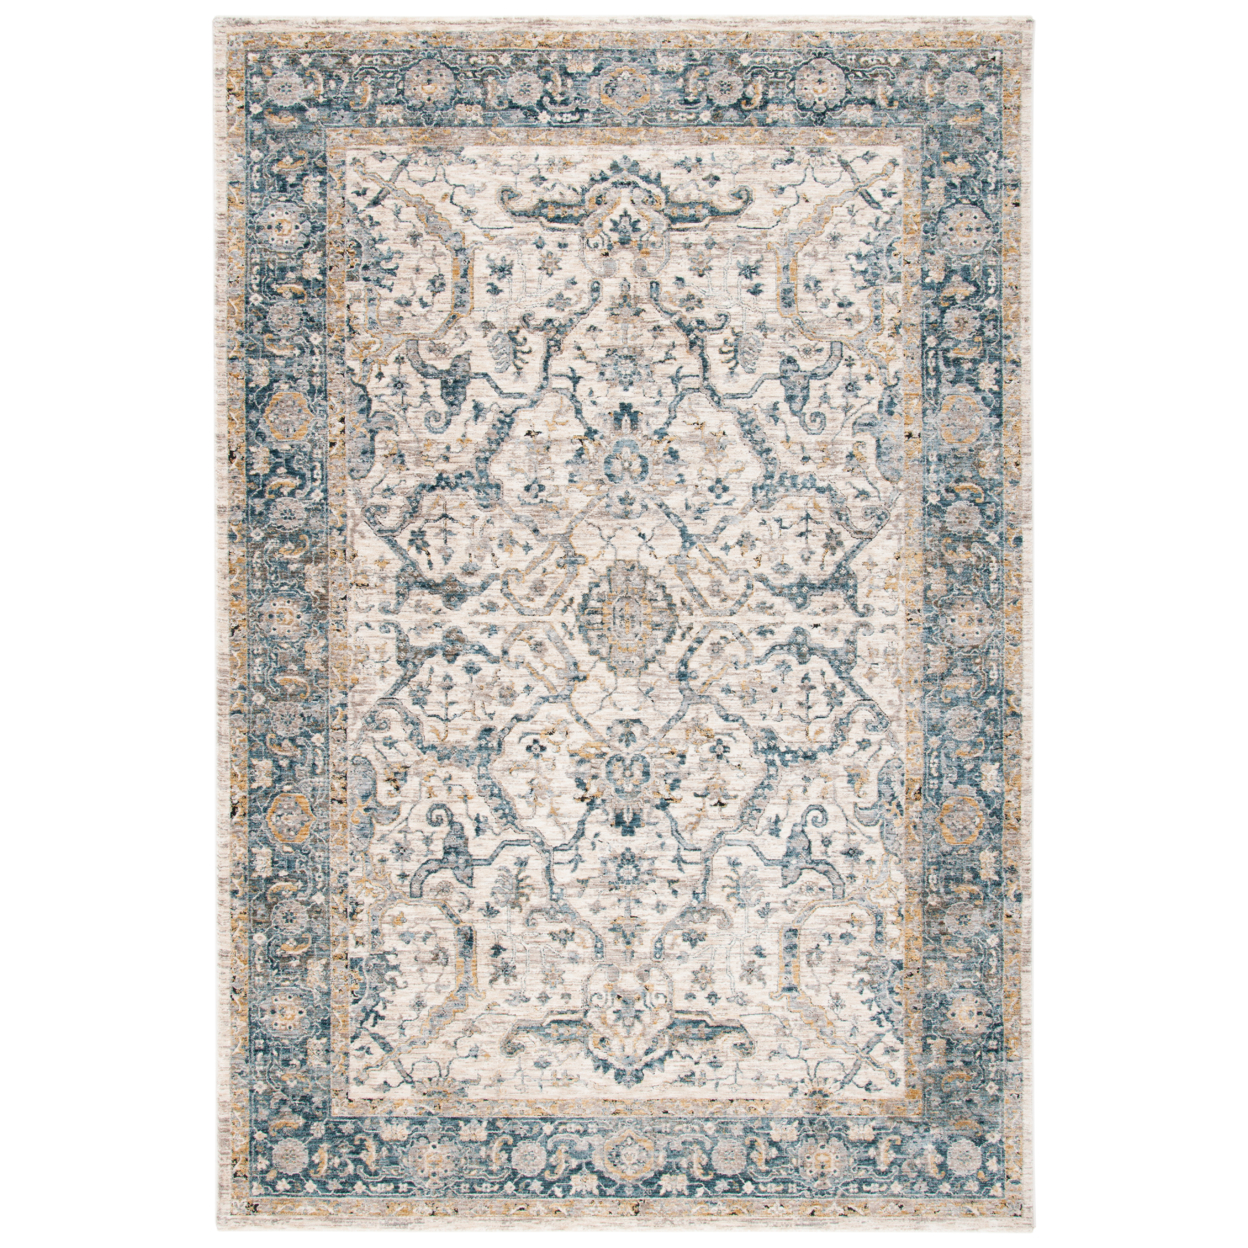 SAFAVIEH Valencia Collection VAL566A Ivory / Blue Rug - 8' X 10'